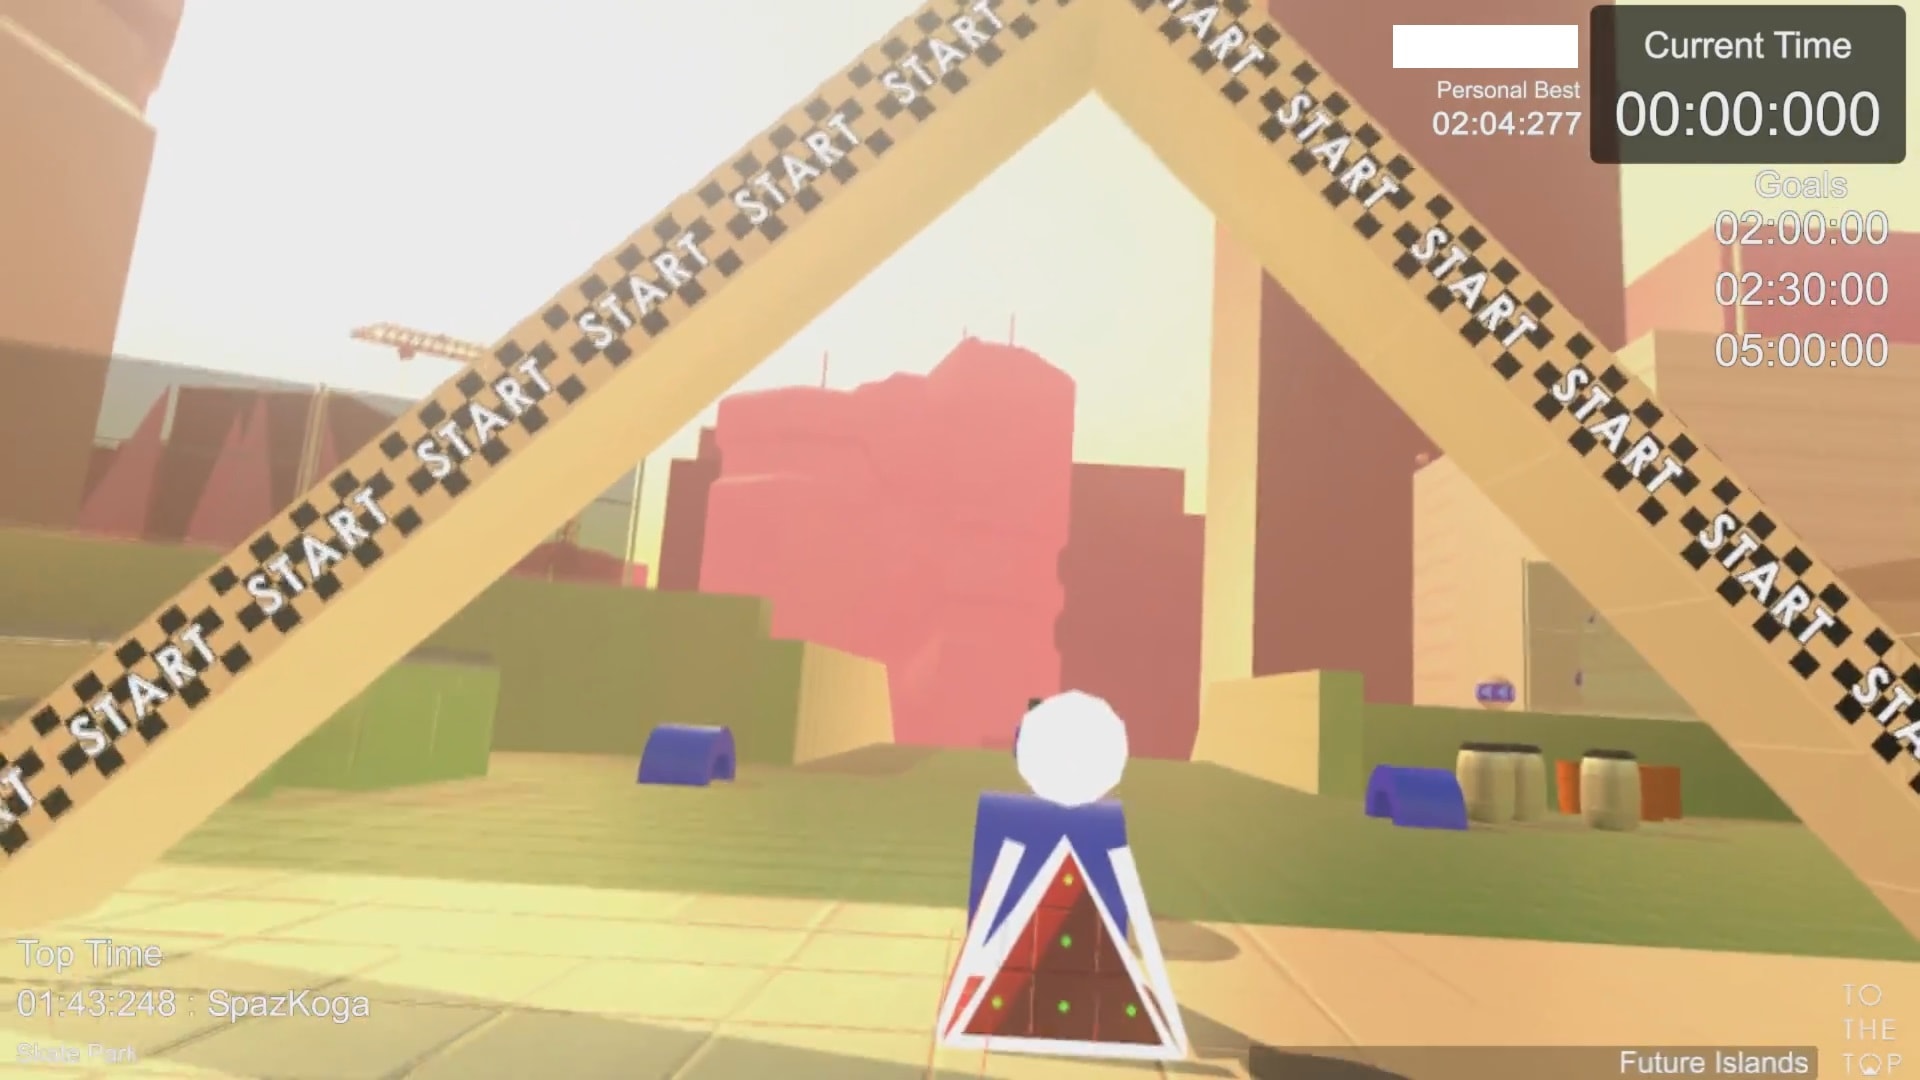 TO THE TOP VR - Gameplay Screenshot 2